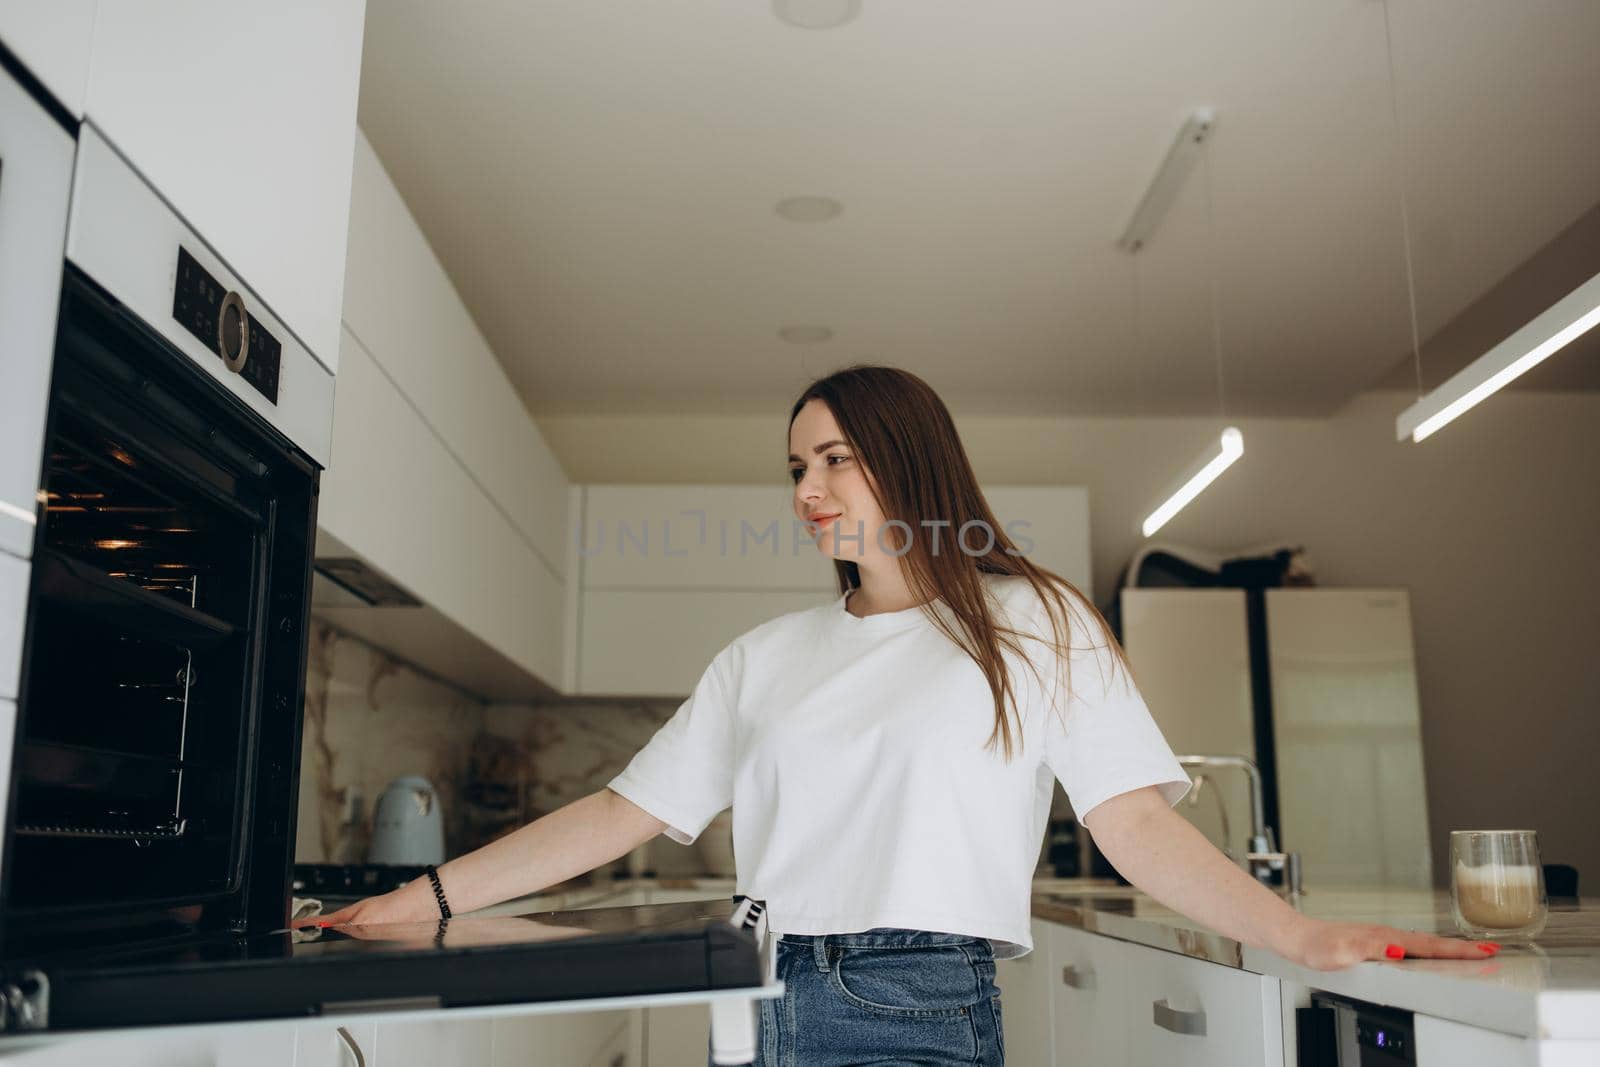 Portrait of happy girl putting baking tray in kitchen oven by fentonroma